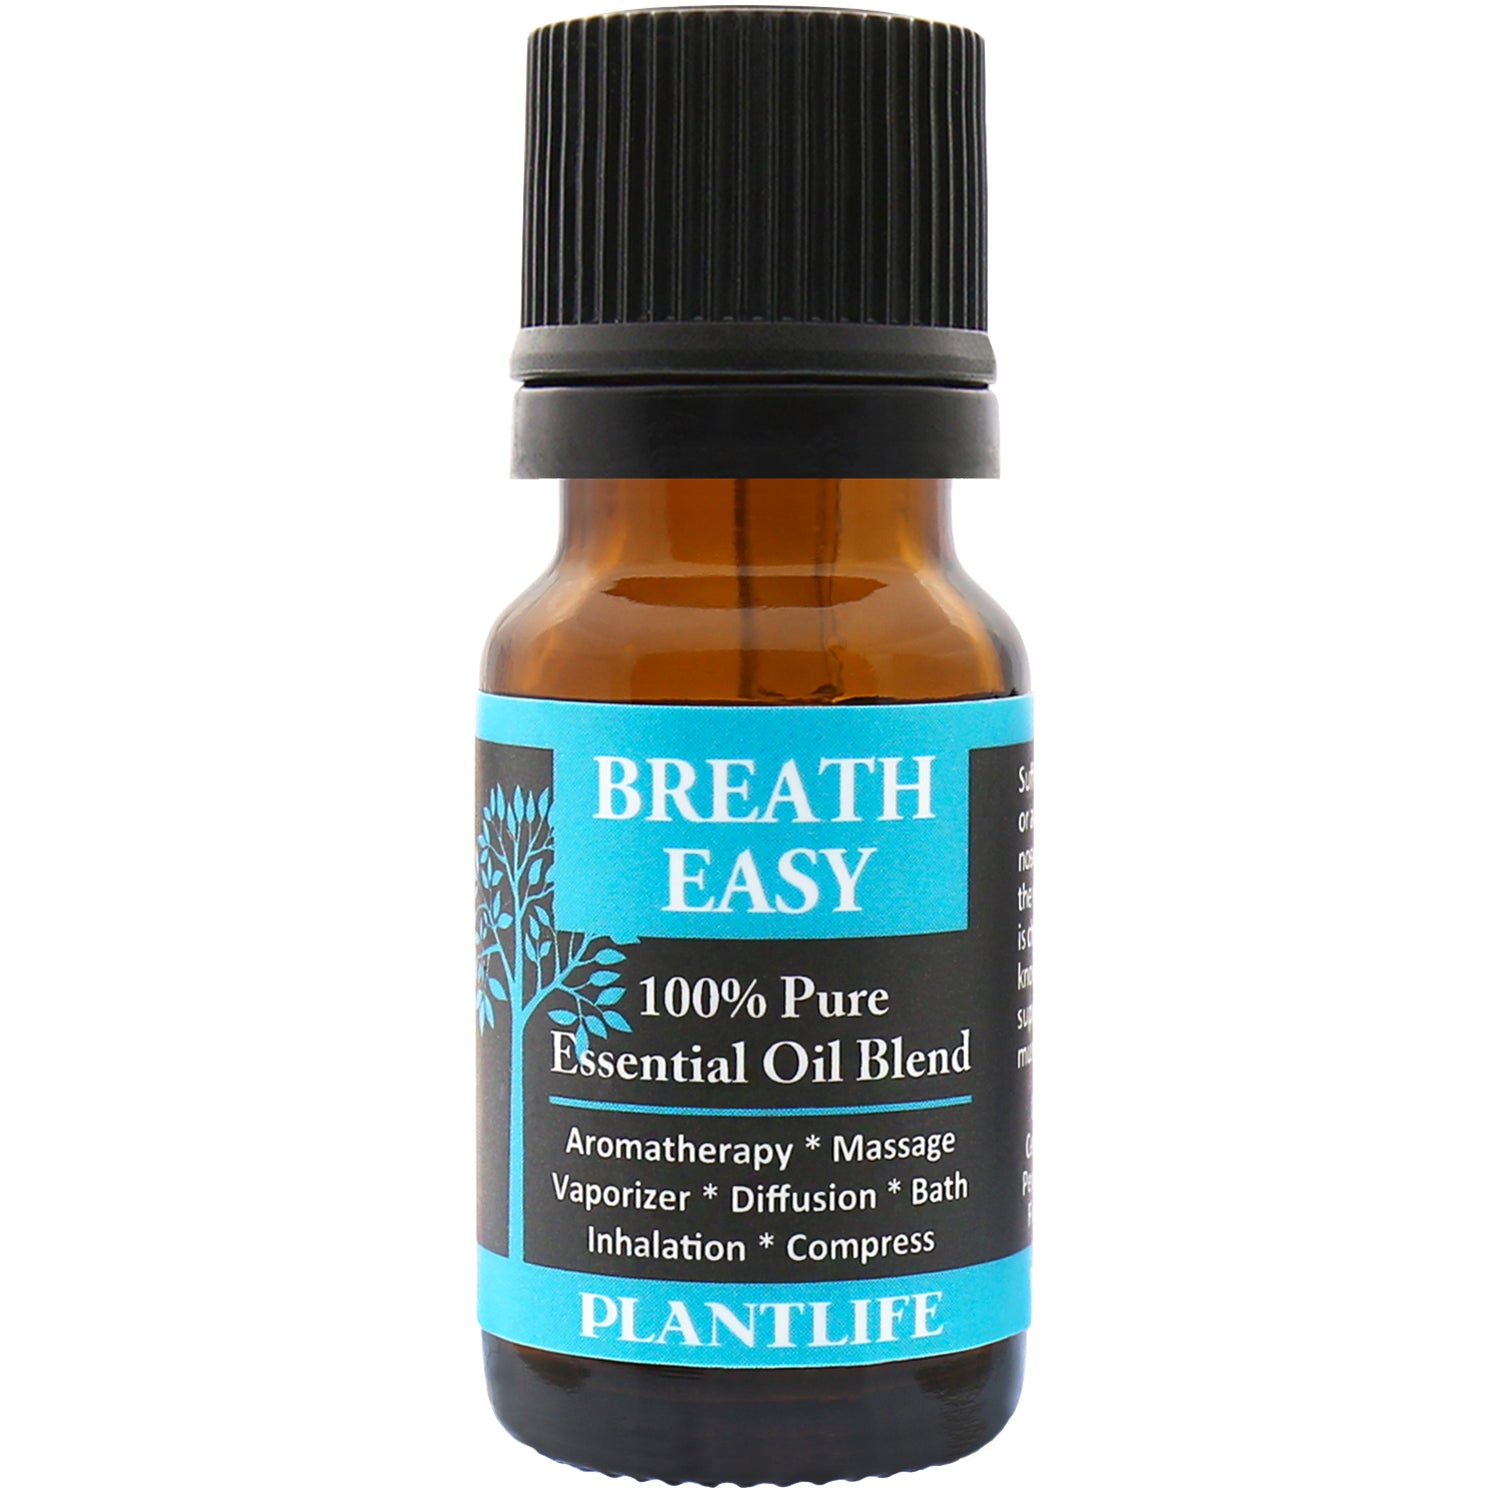 Breath Easy Essential Oil Blend | Essential Oil for Respiration